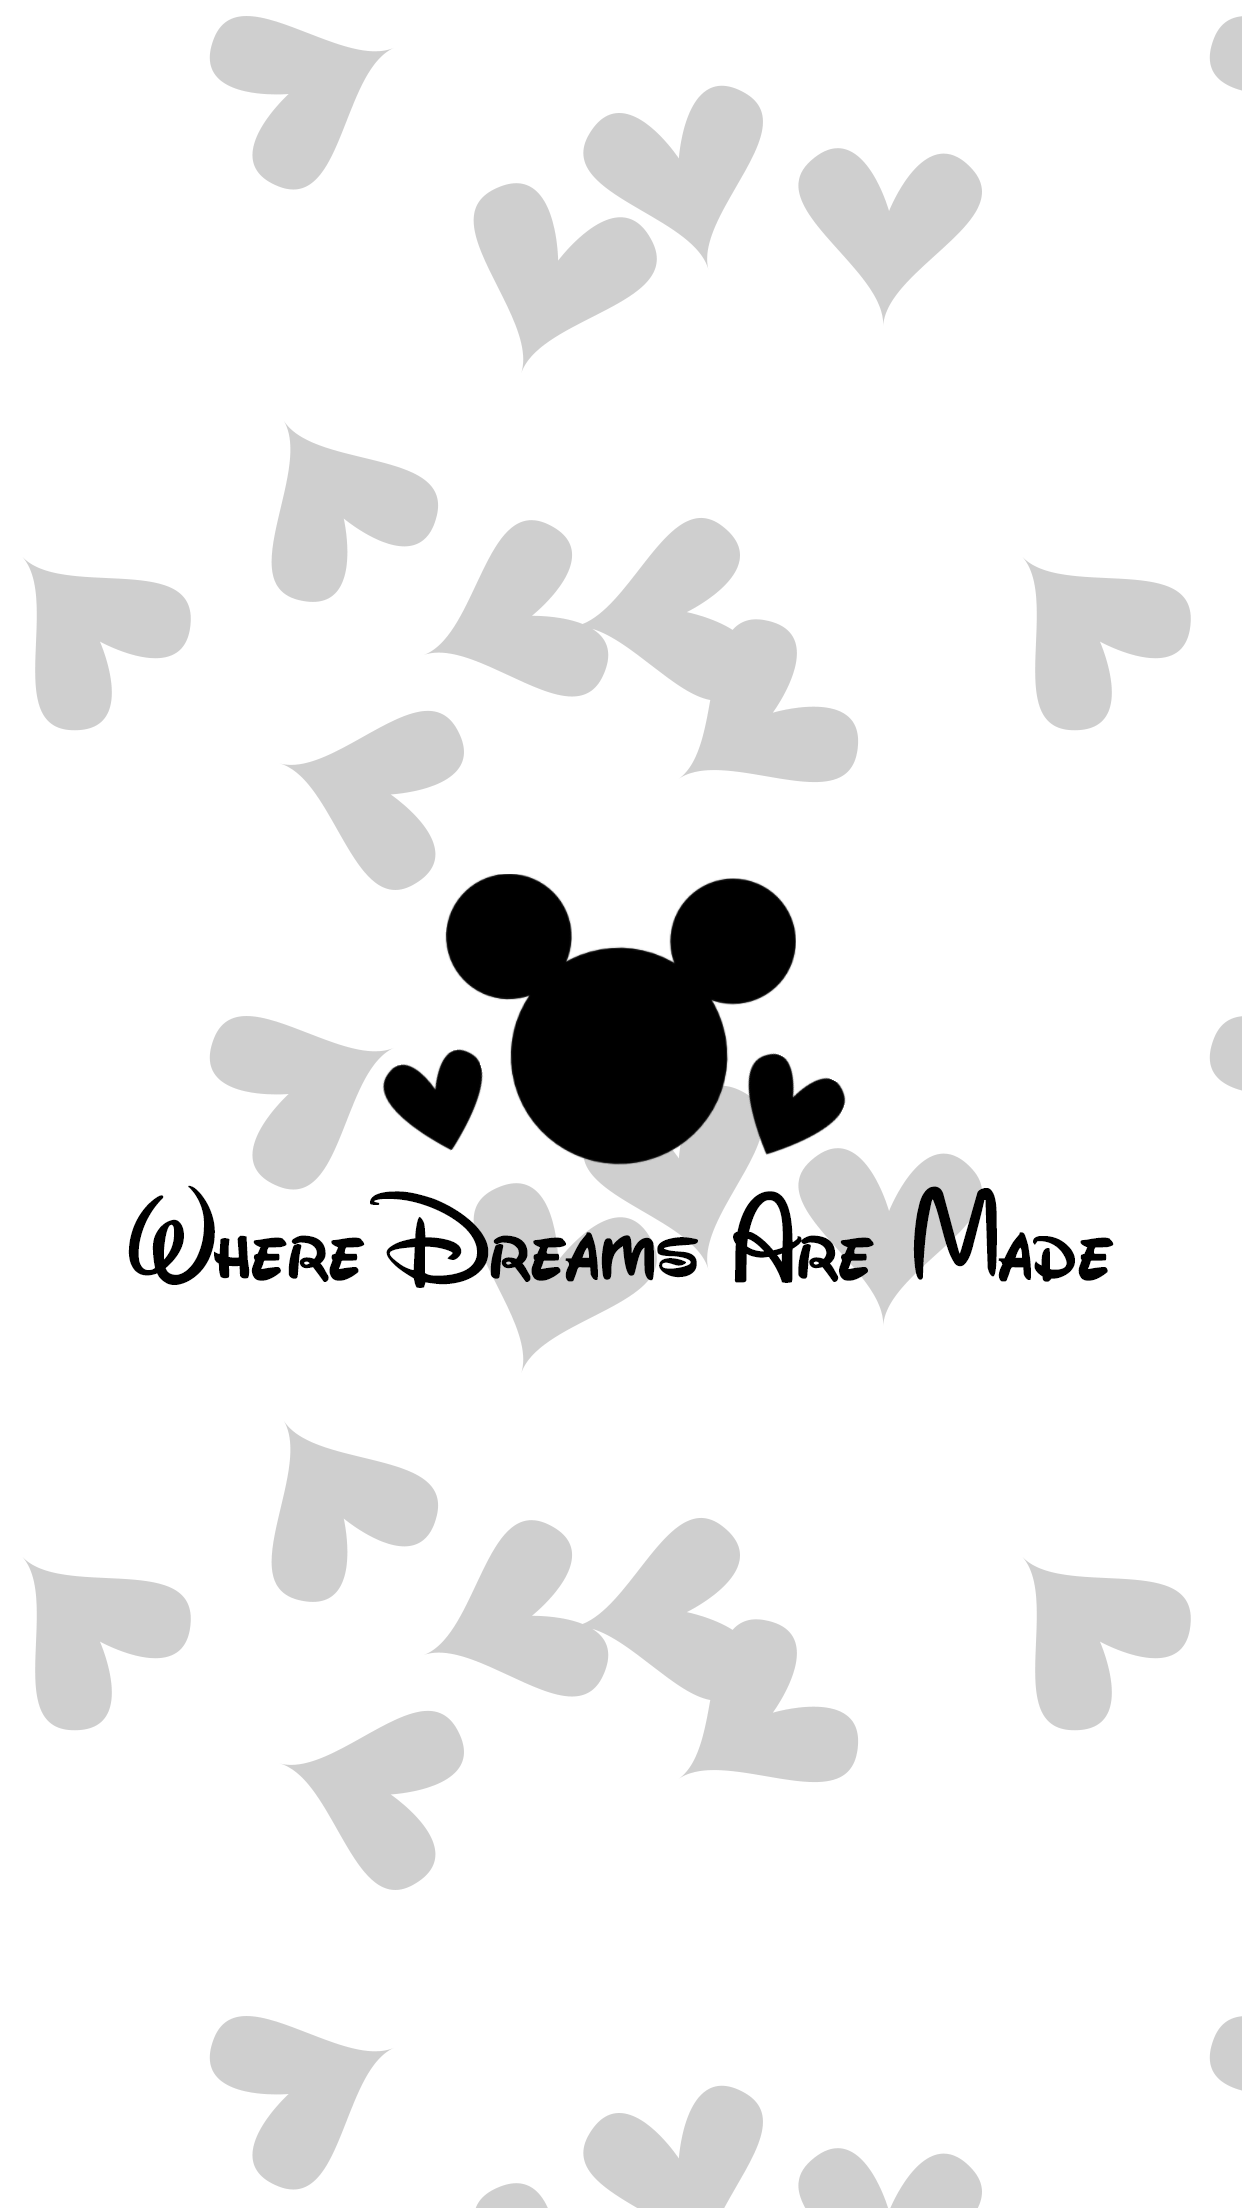 A mickey mouse logo with hearts on it - Mickey Mouse, Disney